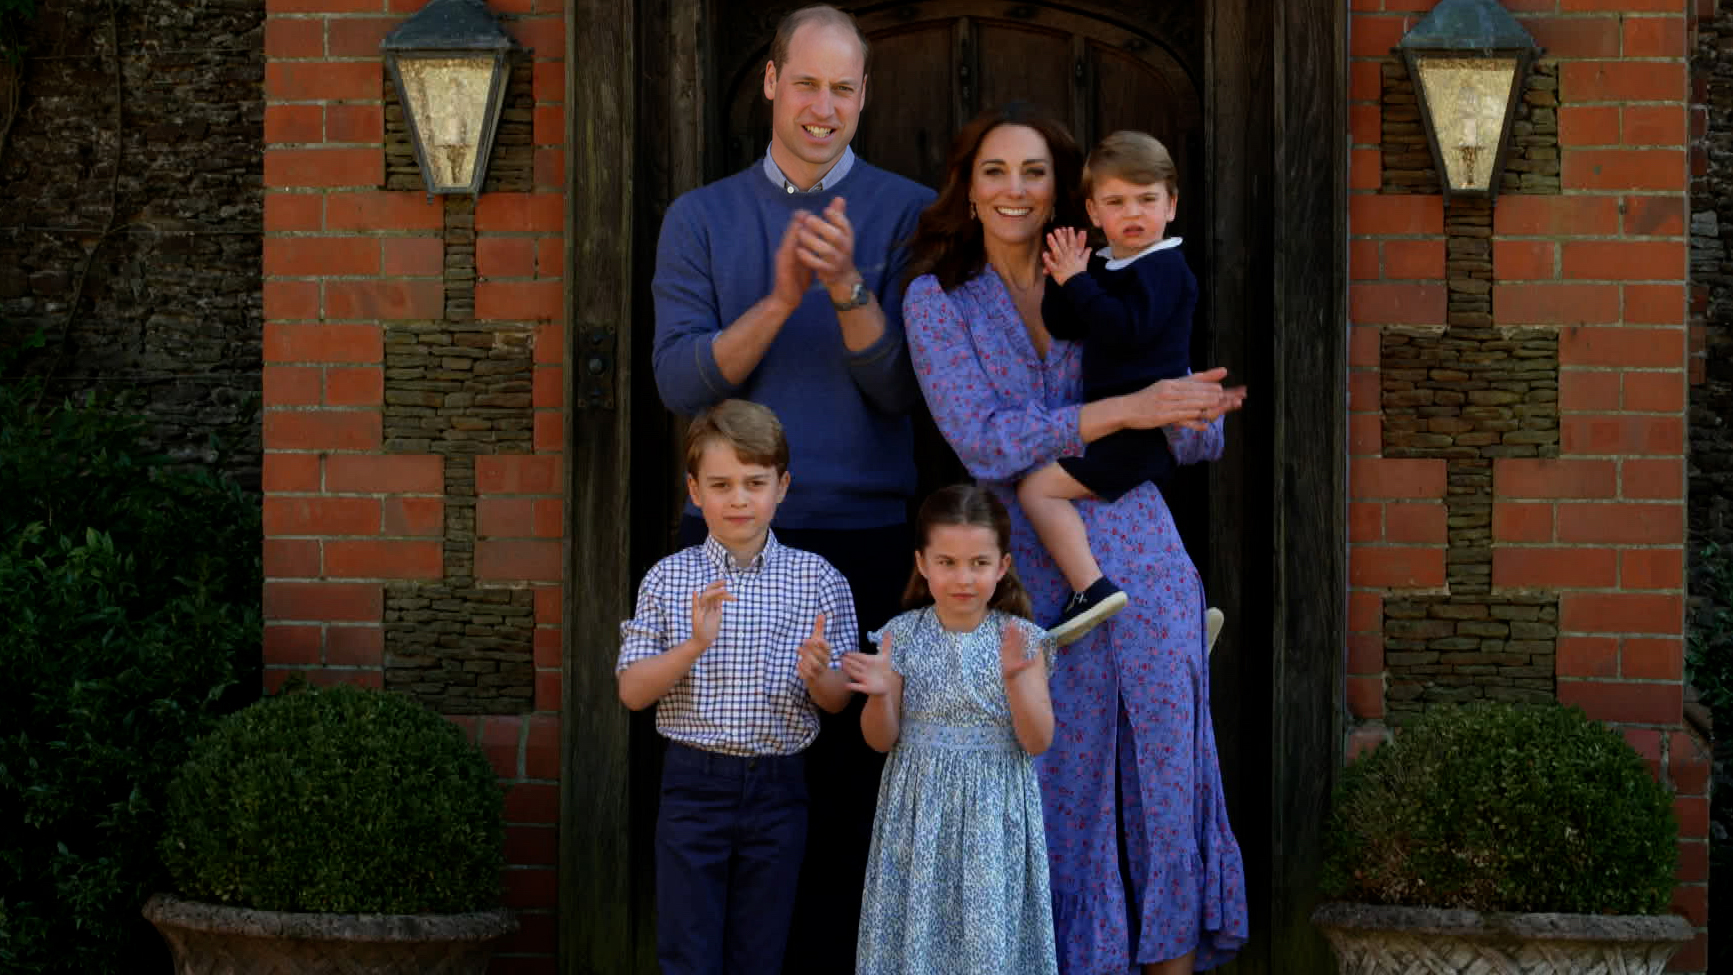 Prince William and Kate Middleton pose for a family photo with their children.